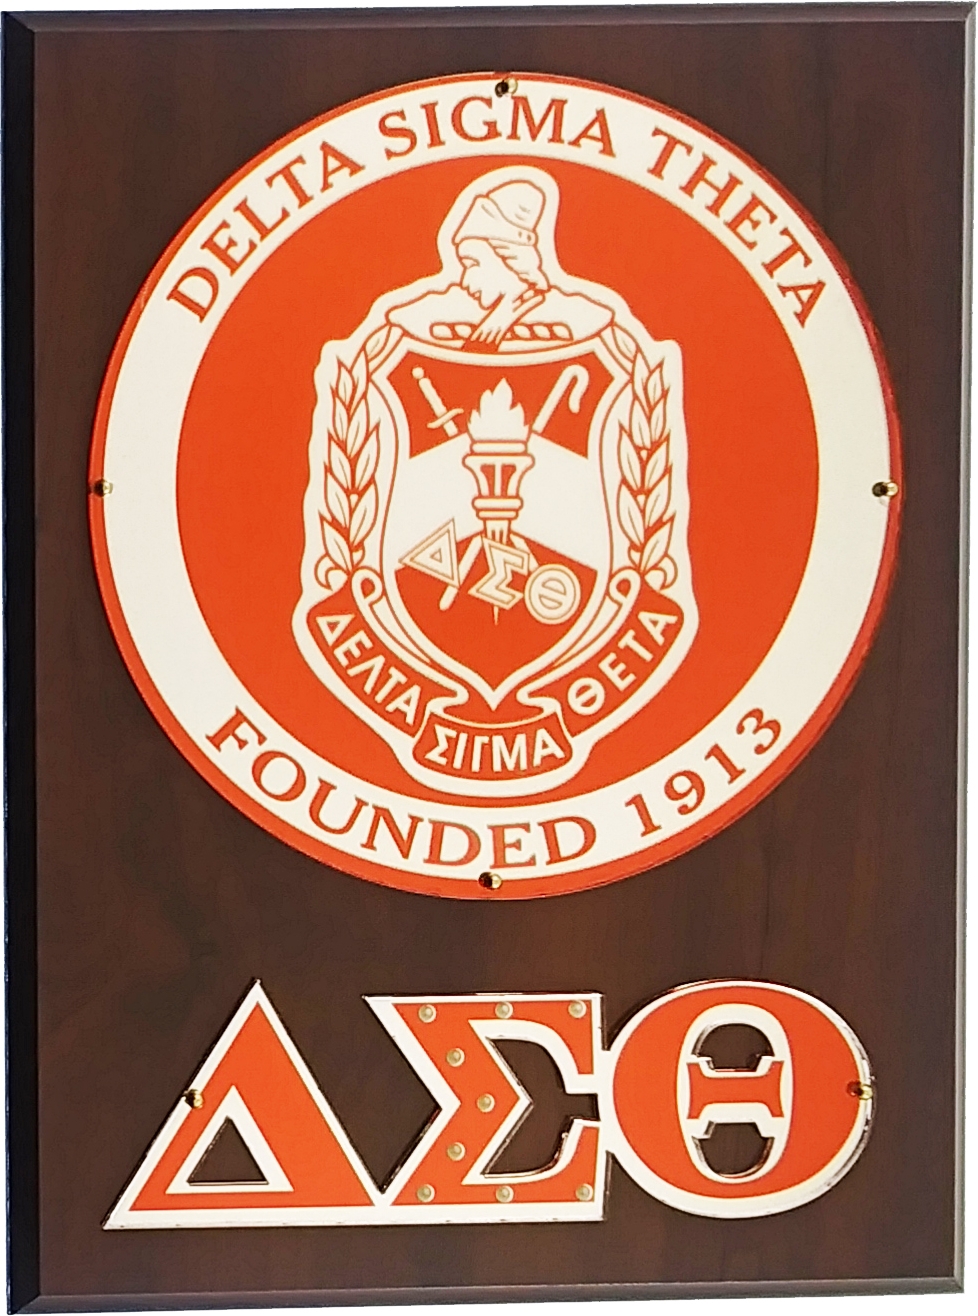 delta-sigma-theta-circle-crest-wooden-wall-plaque-brown-12-x-9-product-details-the